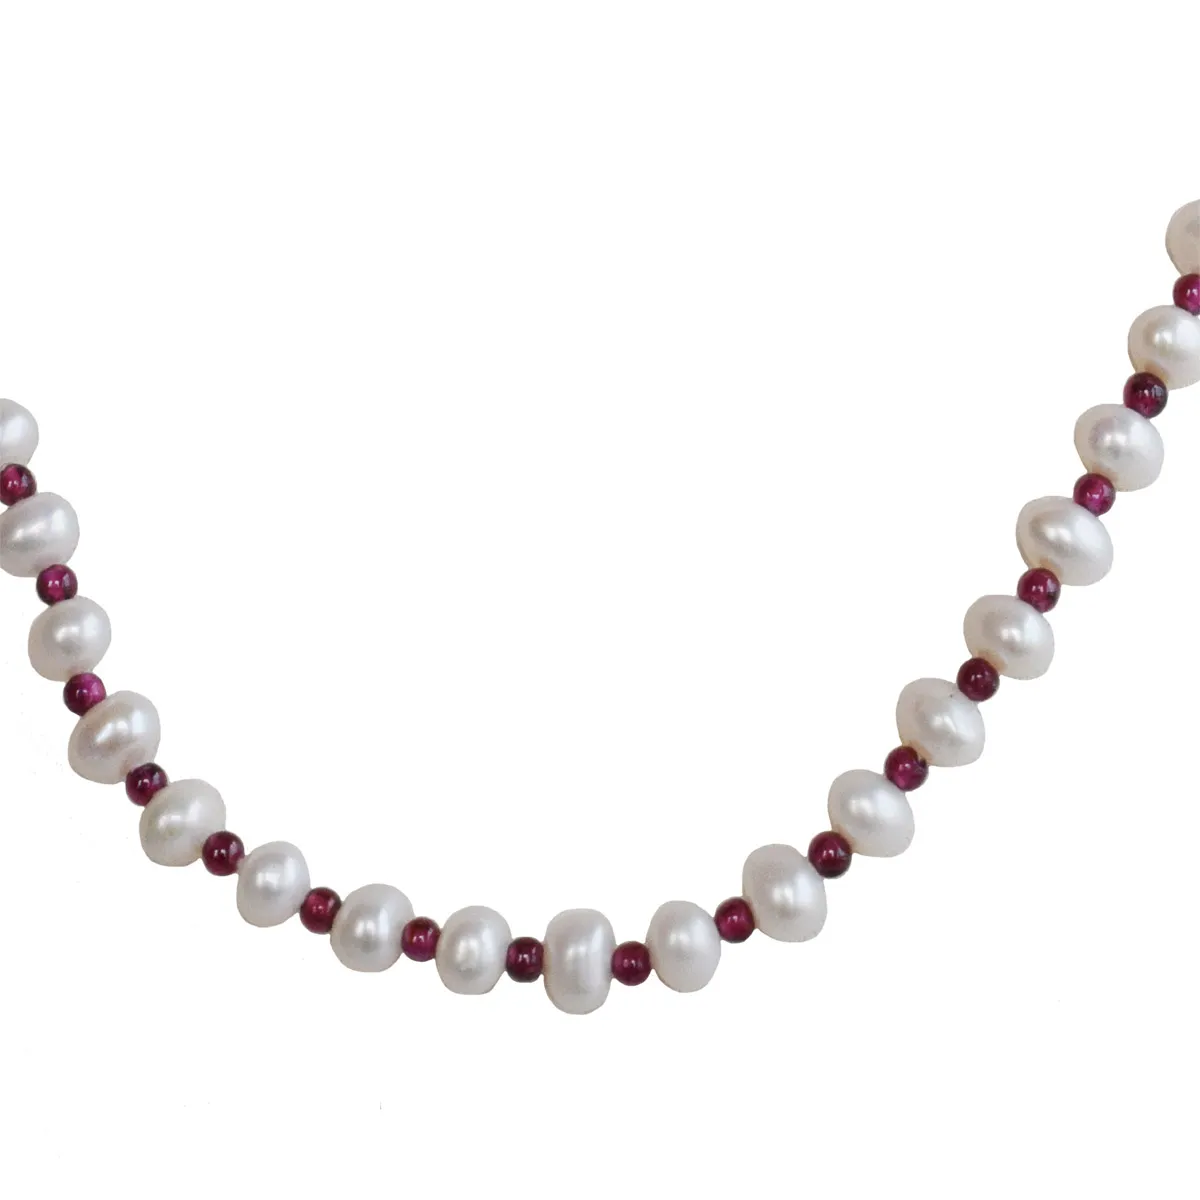 Single Line Necklace & Red Garnet Beads Necklace for Women (SN1042)